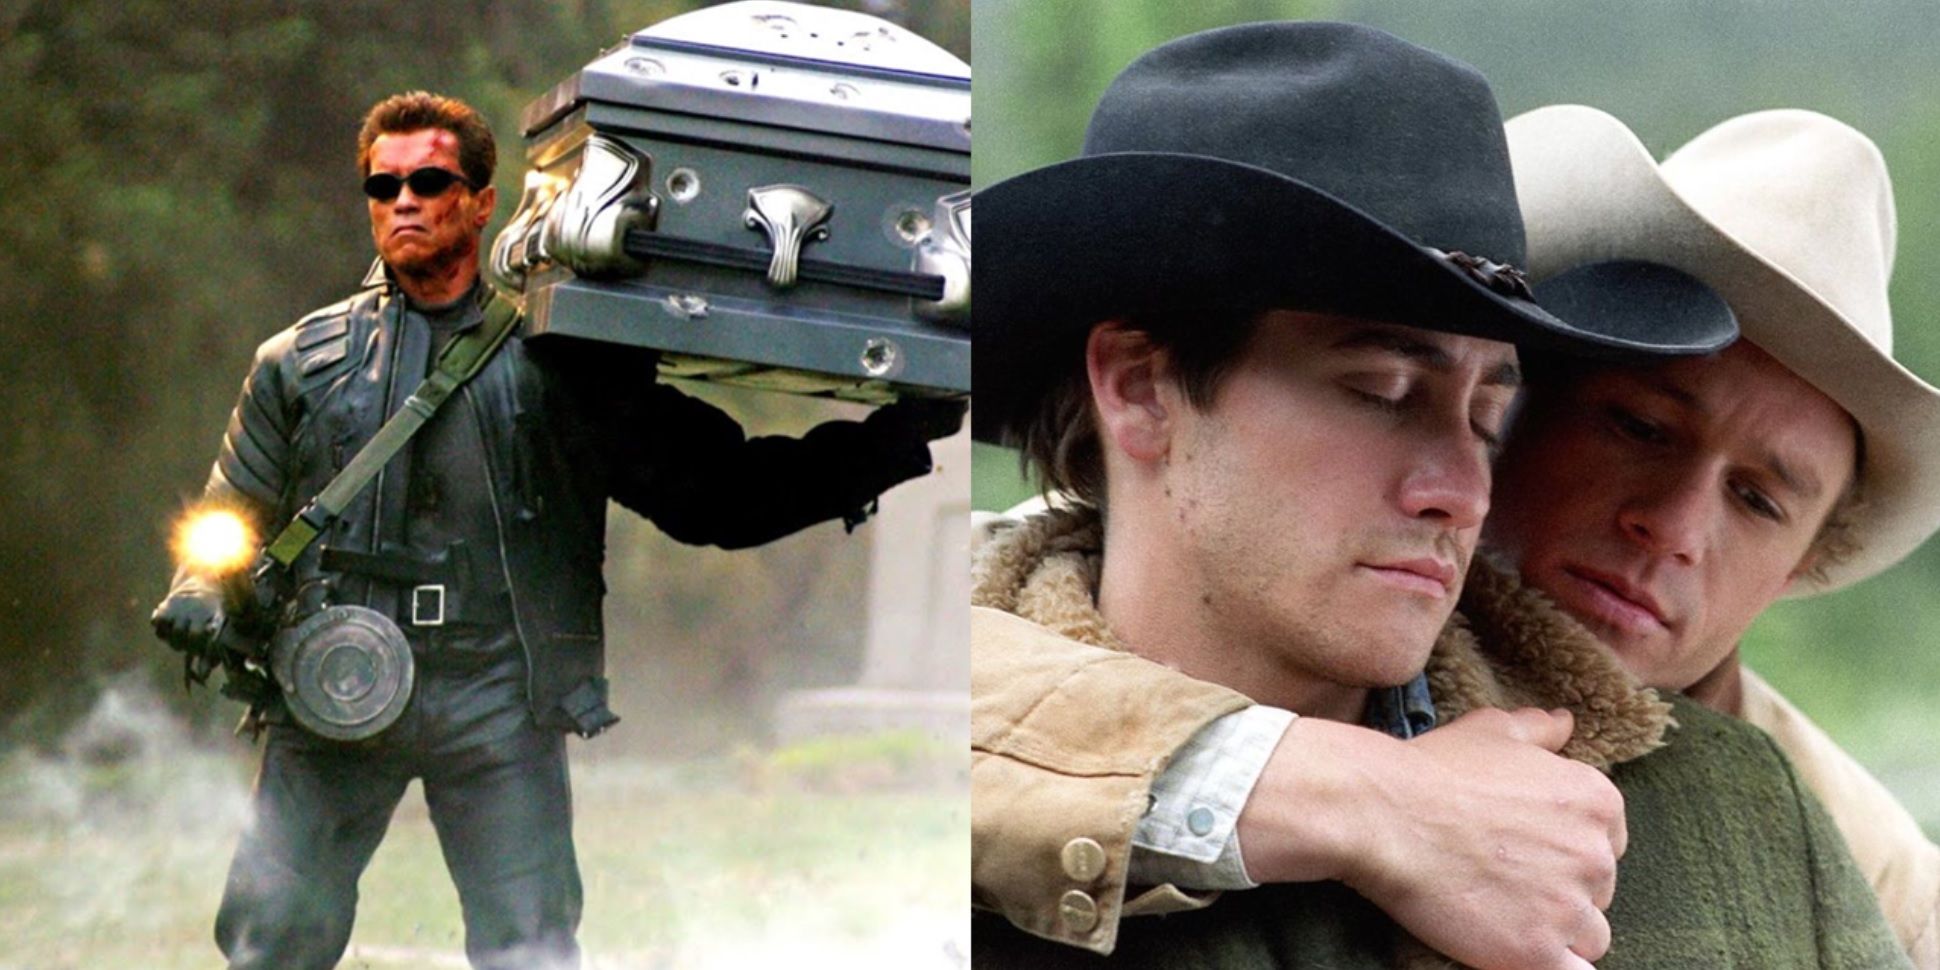 Split image of the T-800 carrying Sarah's coffin in Terminator 3 and Jack and Ennis in Brokeback Mountain